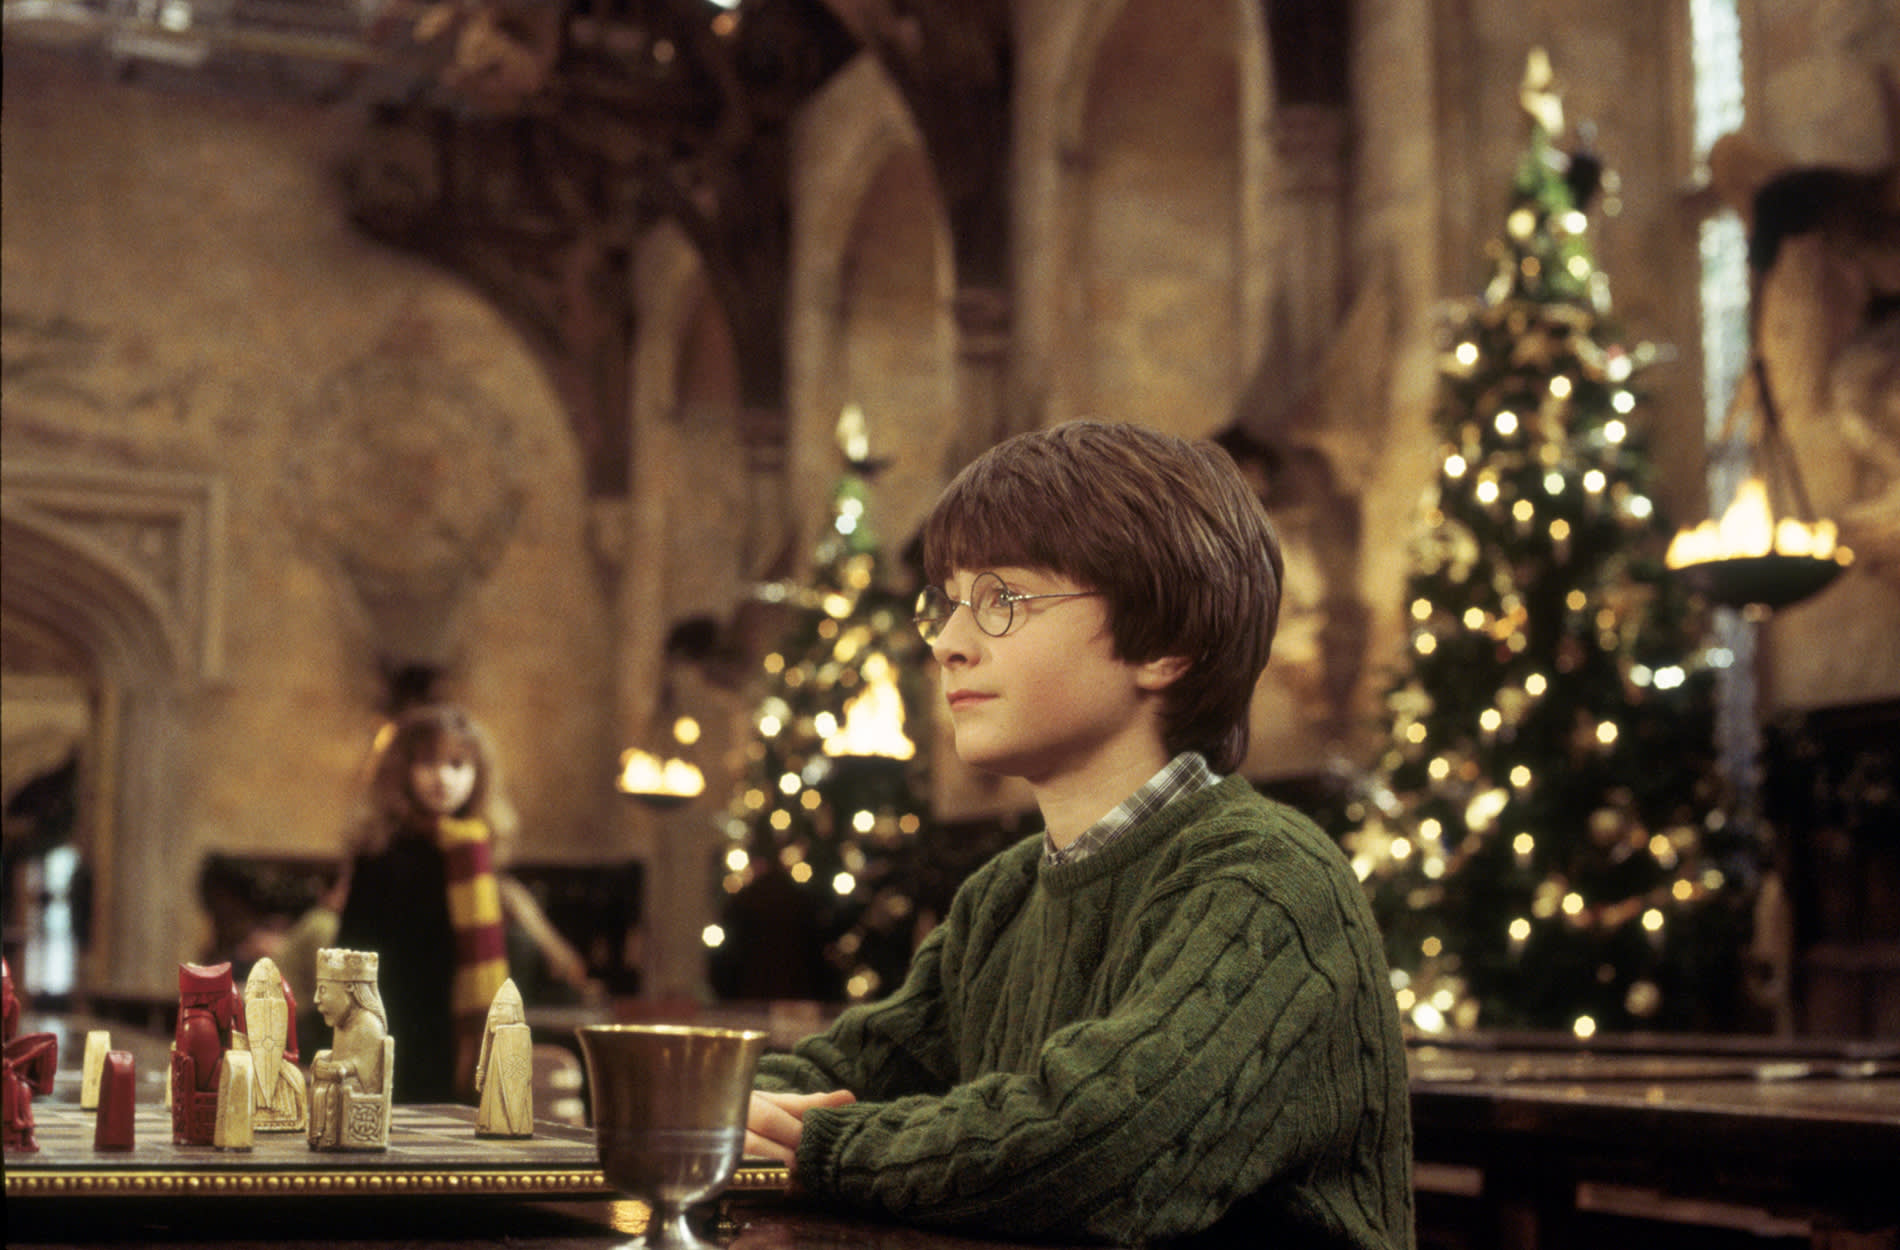 WB-HP-F1-Harry-sitting-outside-christmas-tree-with-goblet-web-landscape